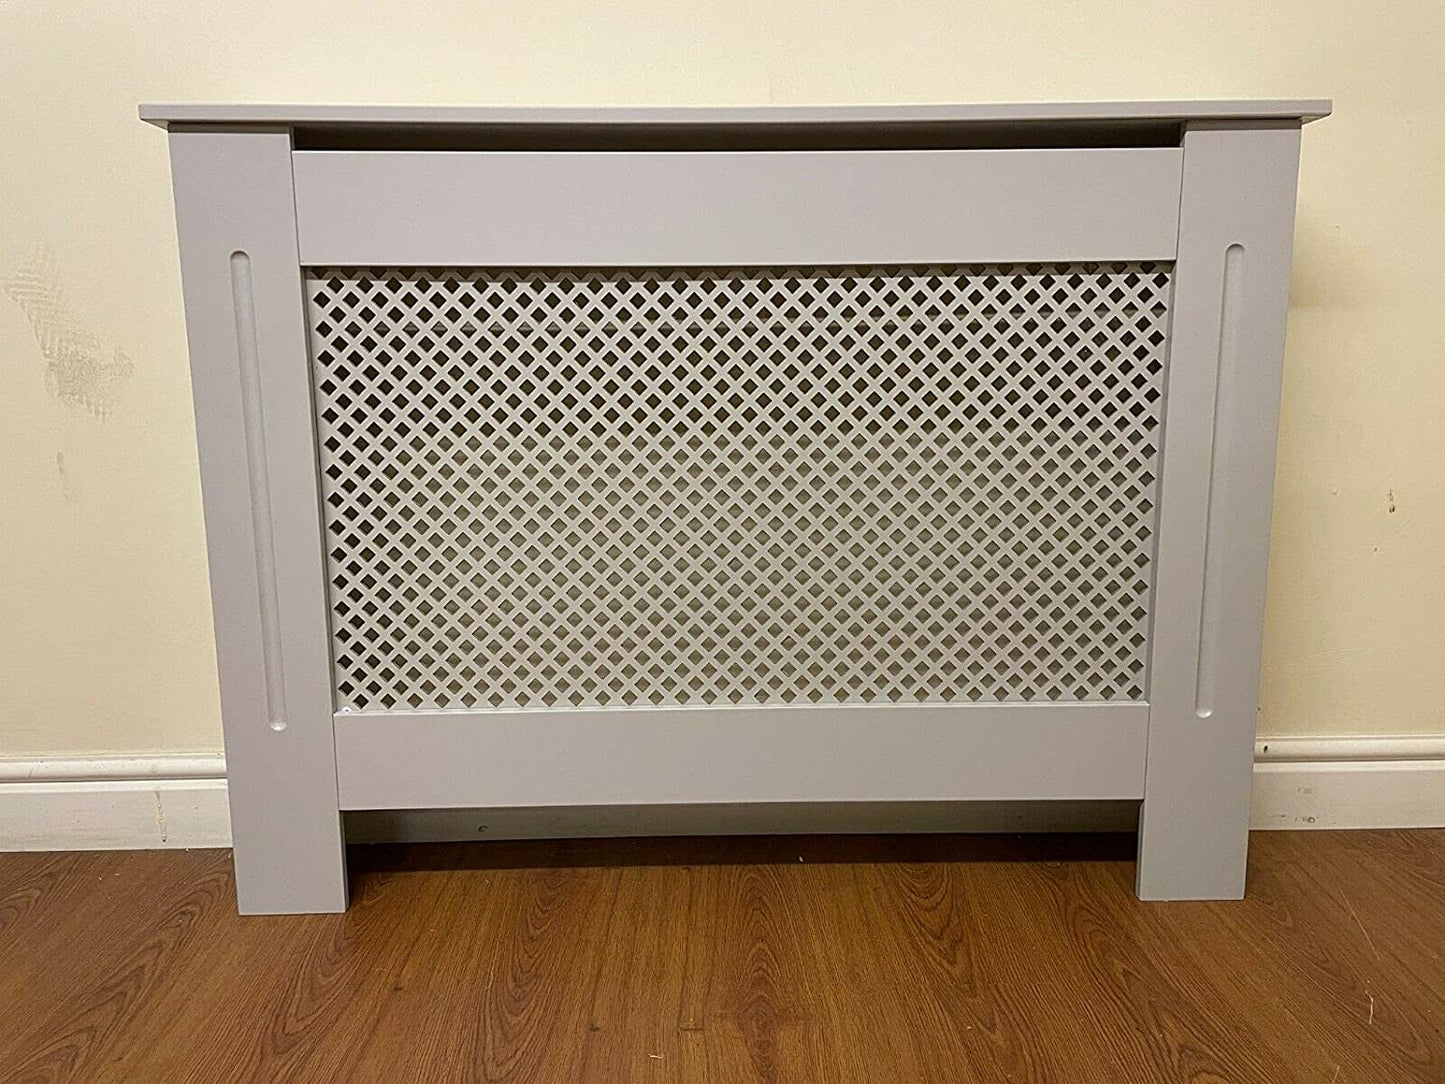 HYGRAD BUILT TO SURVIVE Free Standing Wooden MDF Central Radiator Heater Cover Grill Cabinet Shelf In White & Grey